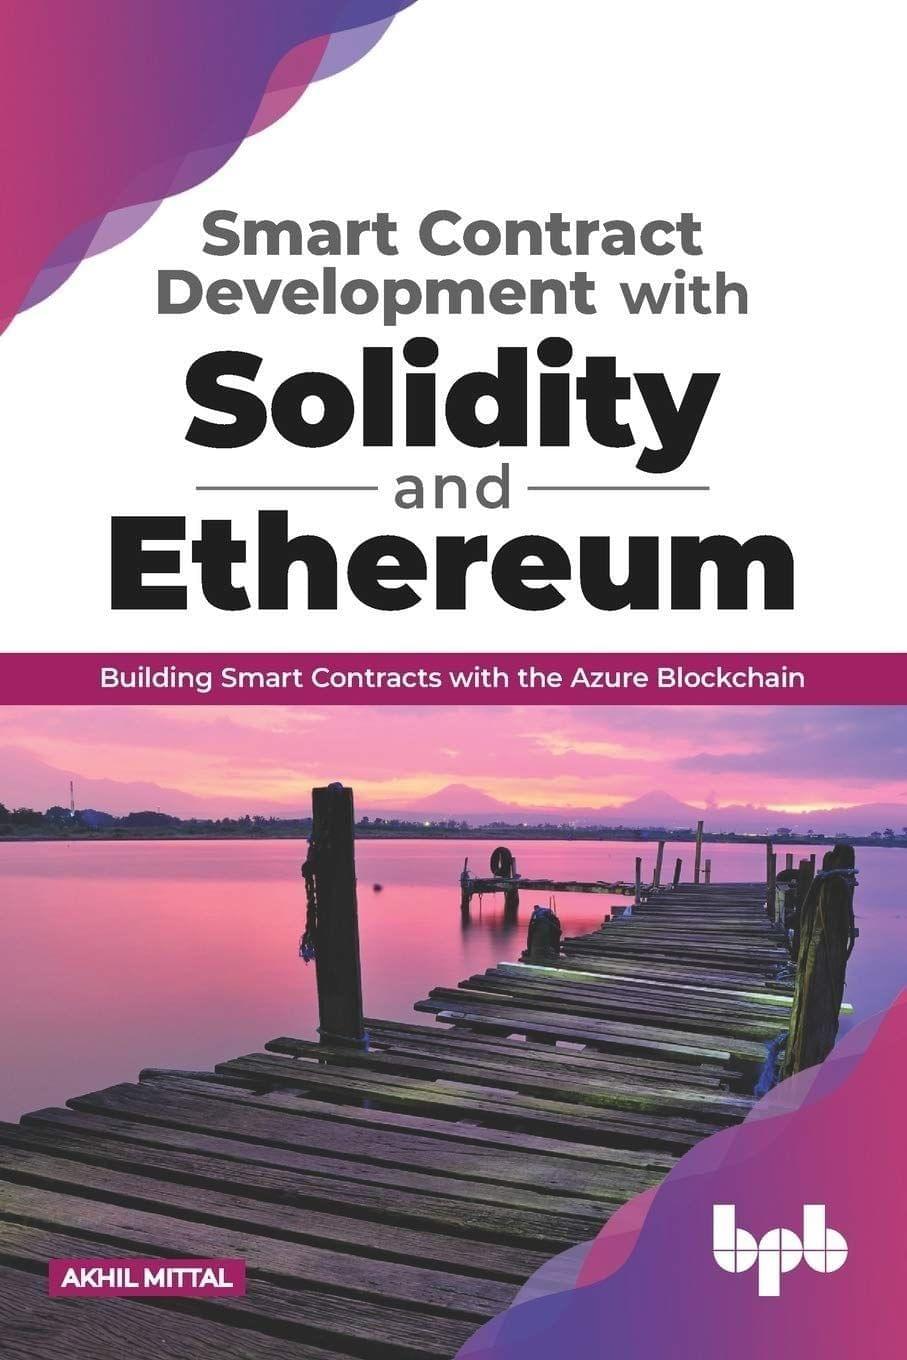 Smart Contract Development with Solidity & Ethereum [Paperback] Akhil Mittal